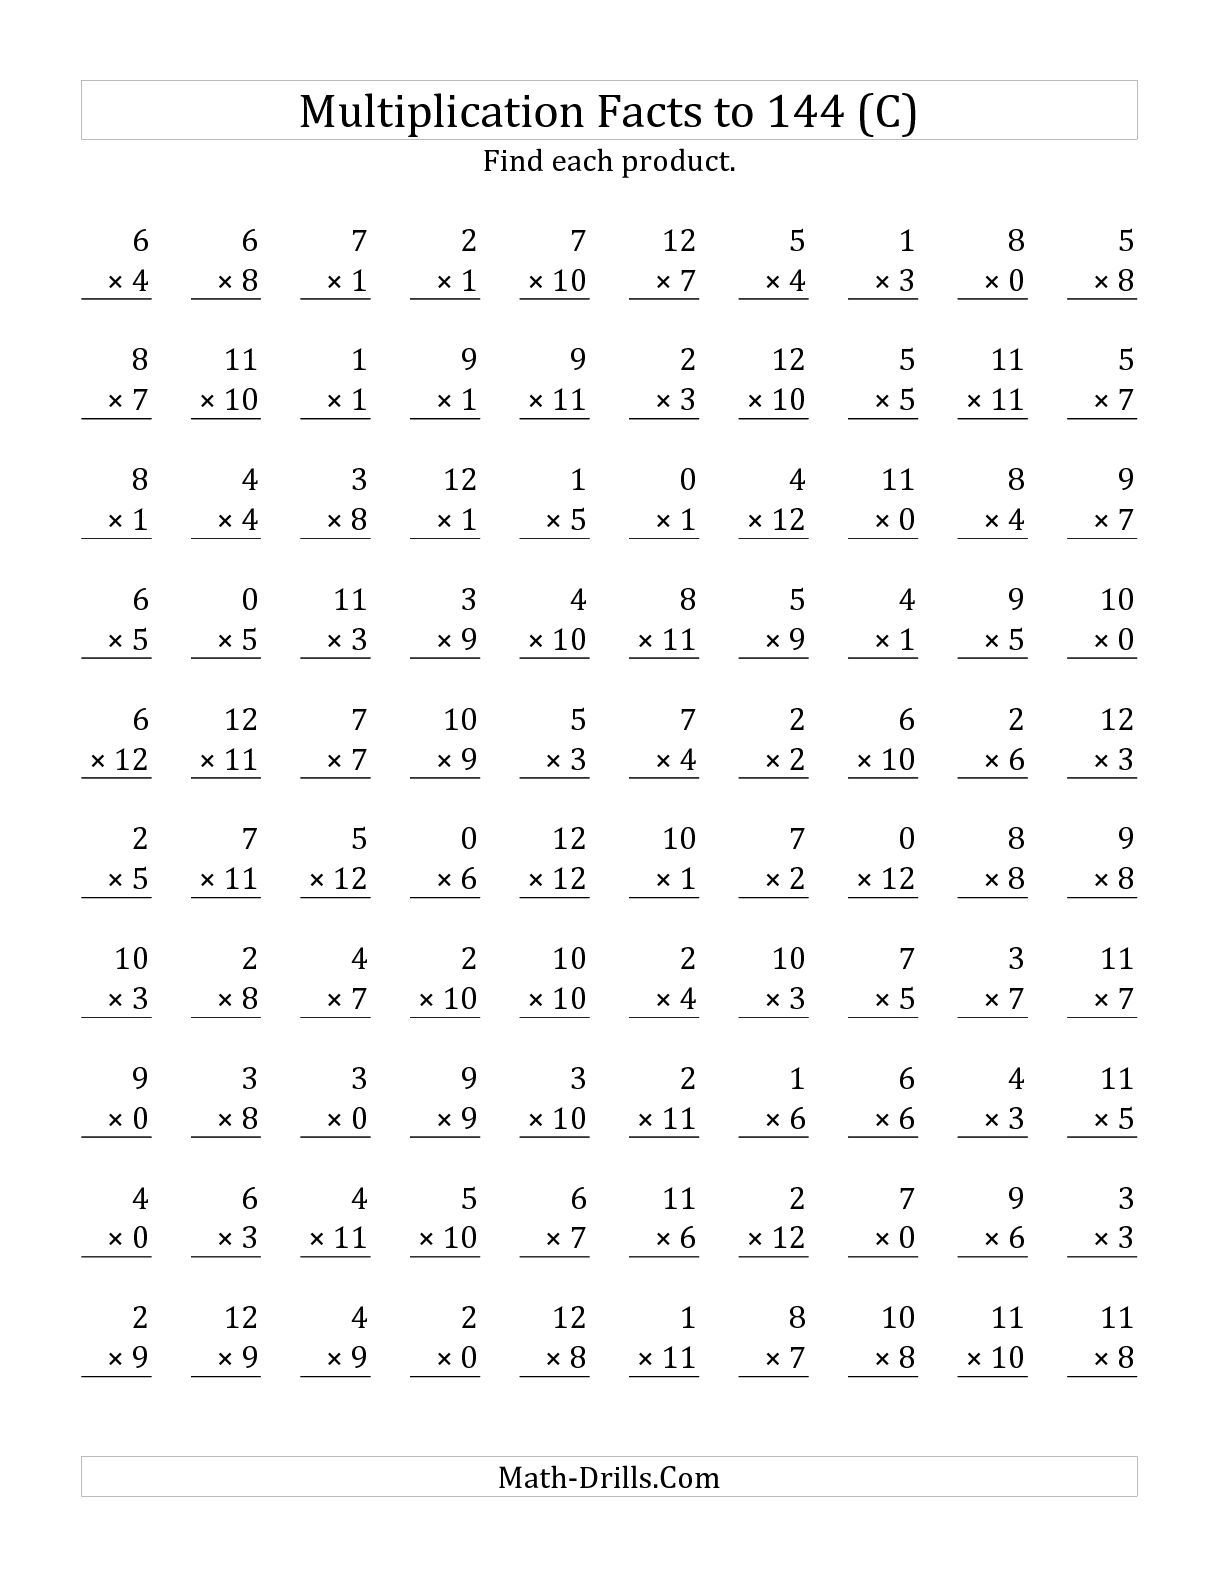 The Multiplication Facts To 144 Including Zeros (C) Math pertaining to Multiplication Worksheets Number 7